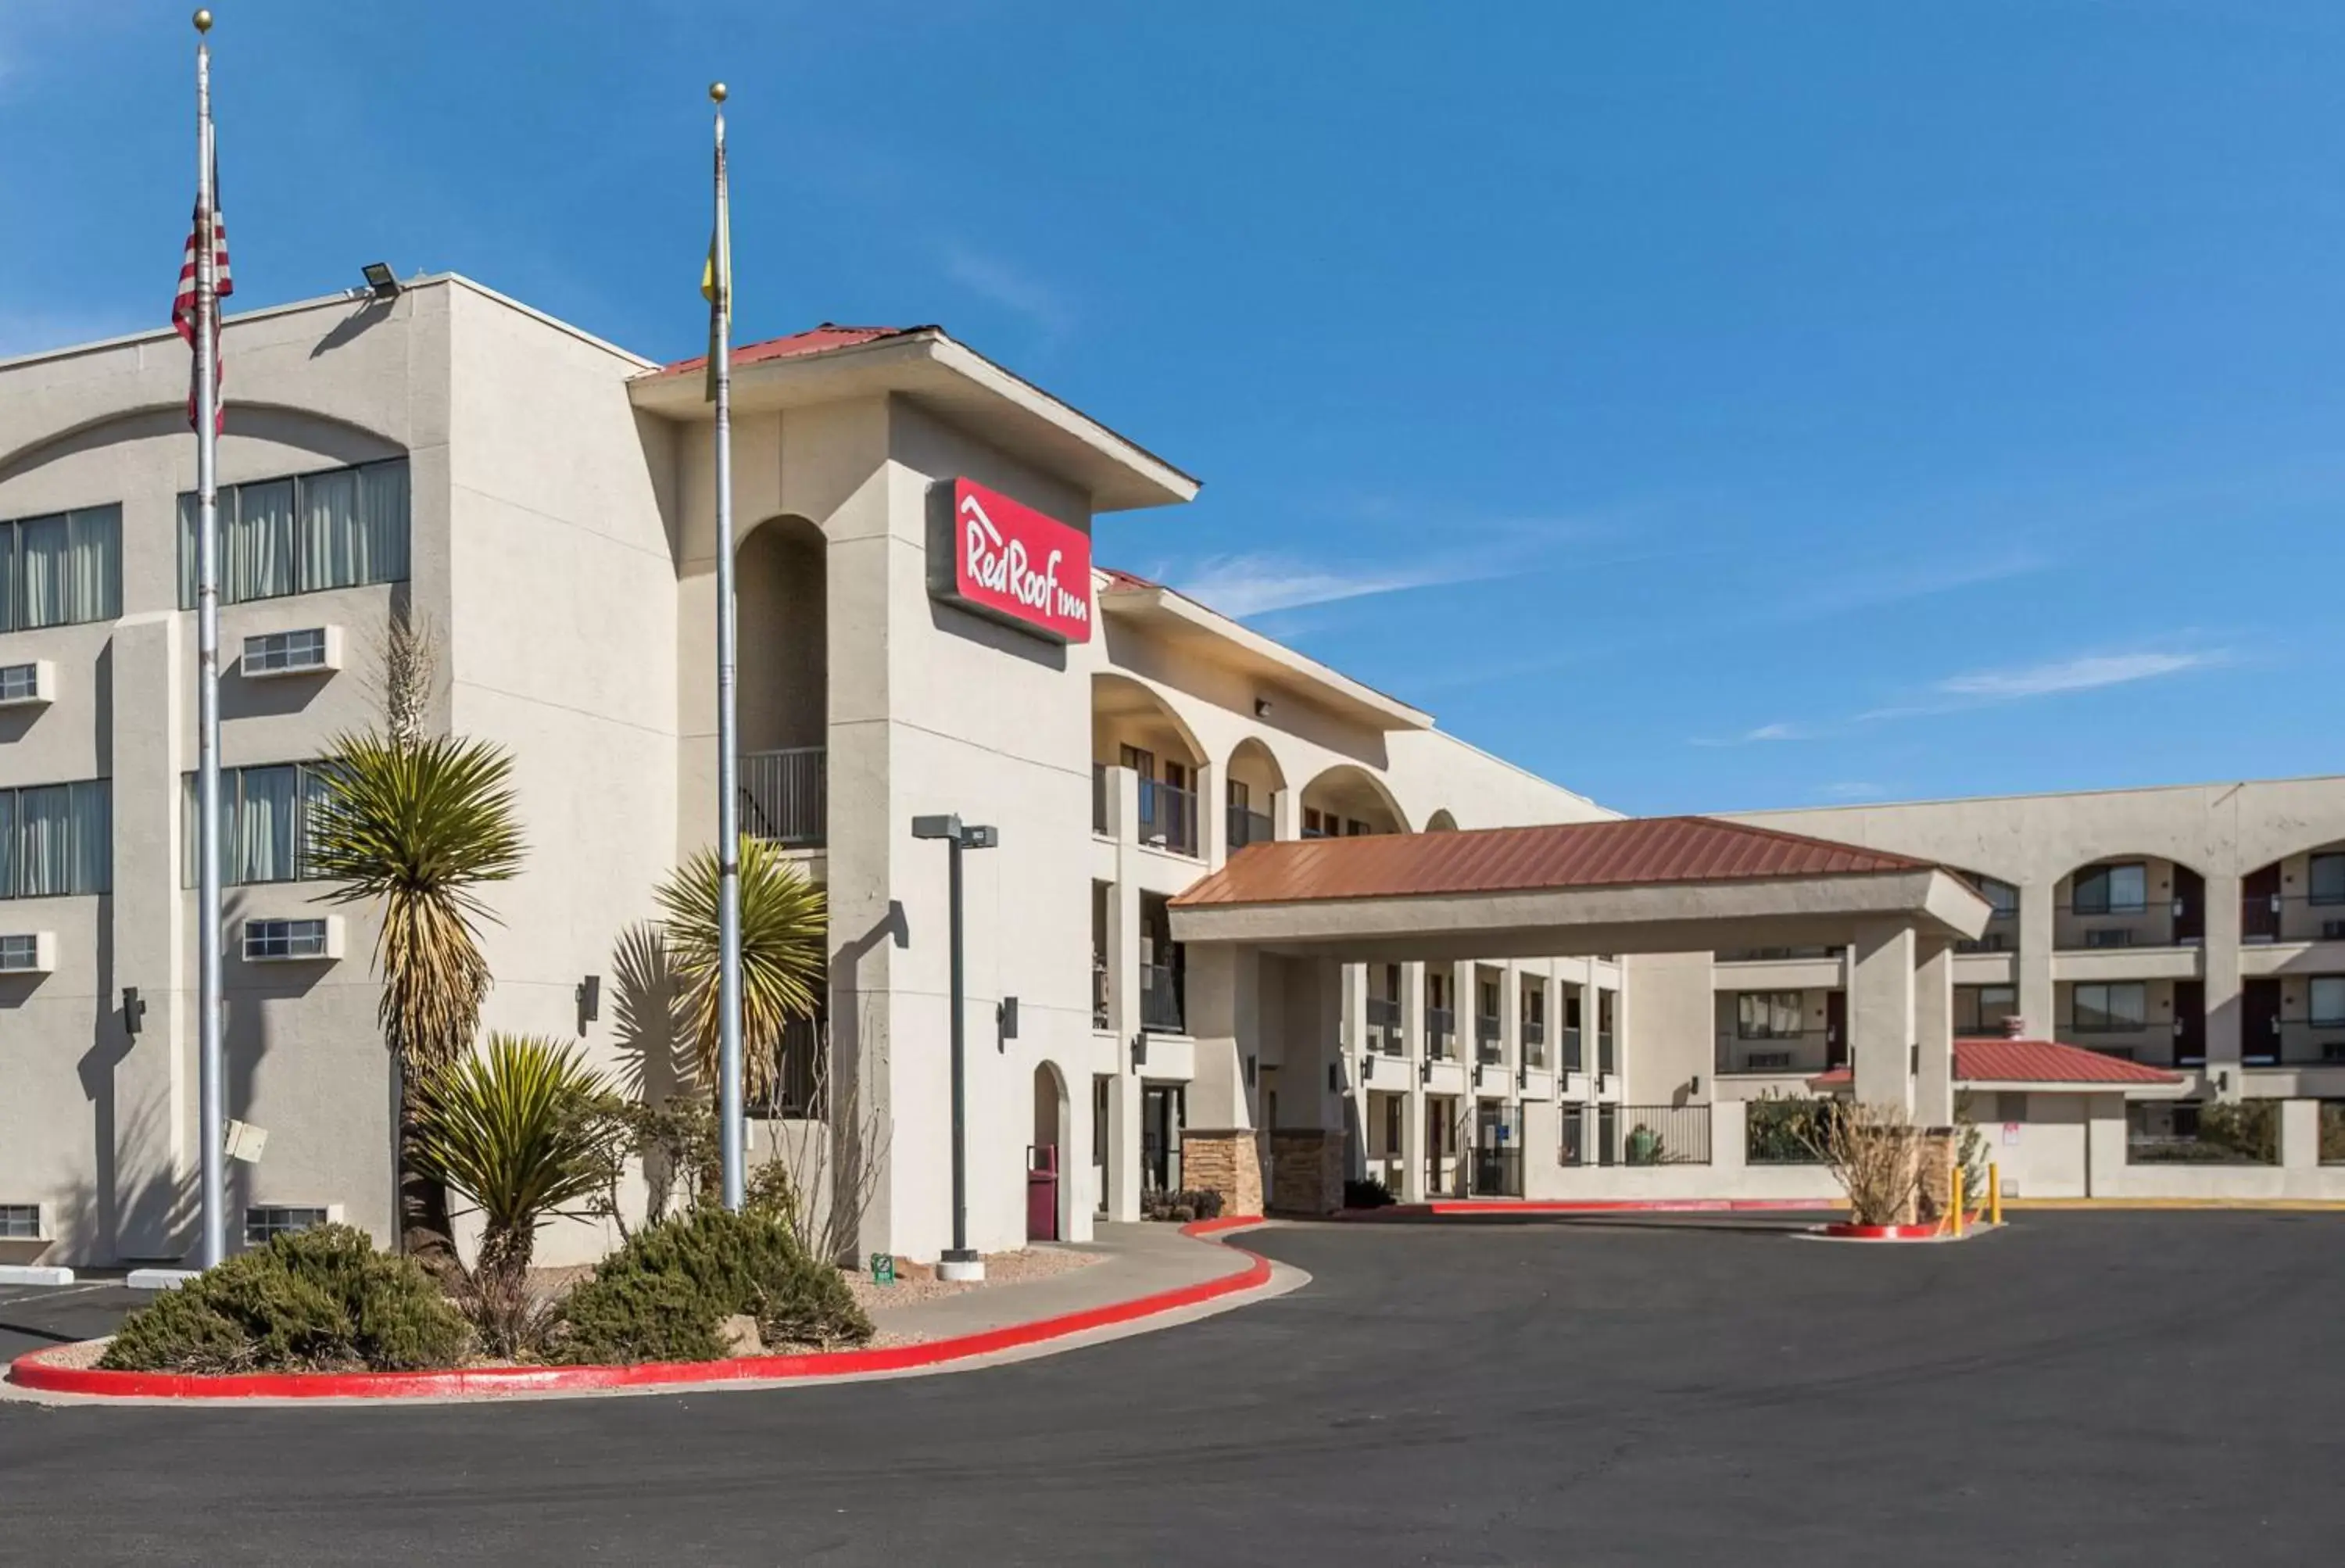 Property Building in Red Roof Inn Albuquerque - Midtown